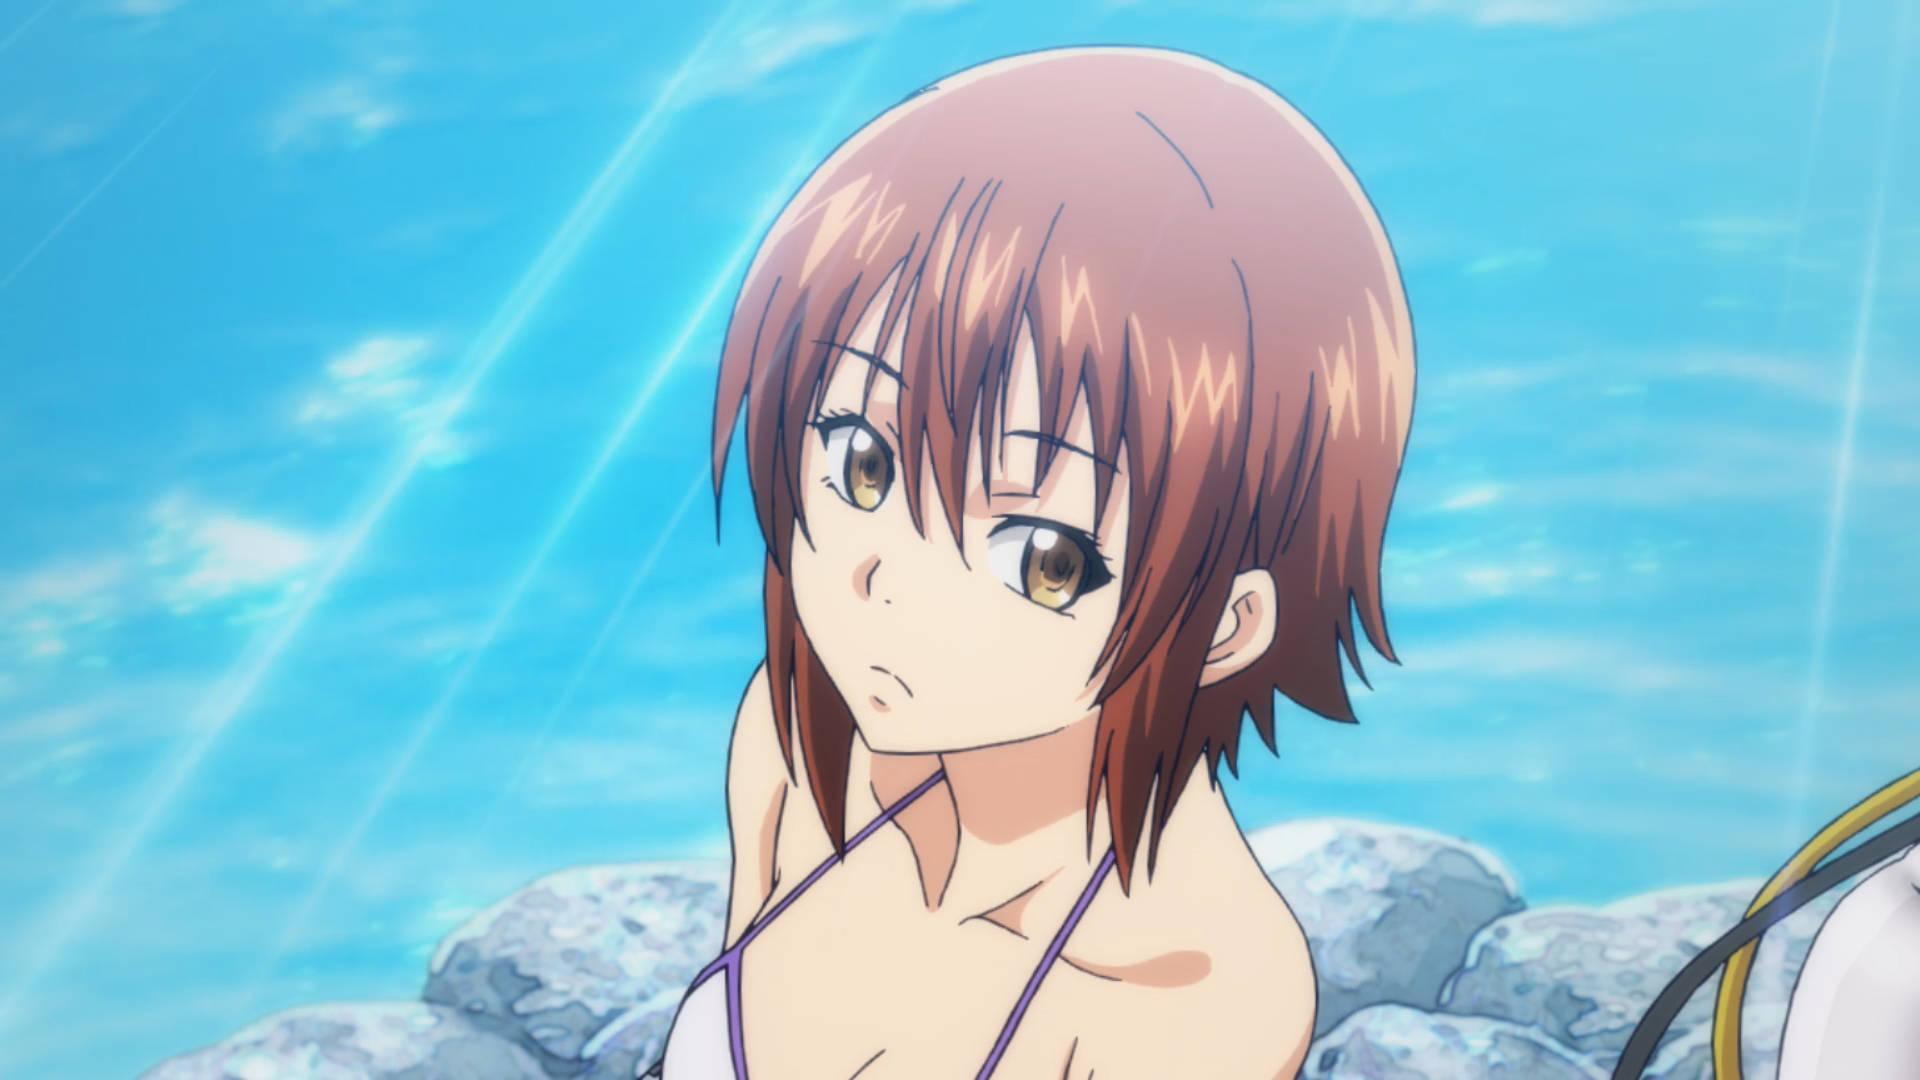 Free Grand Blue Wallpaper Downloads, [100+] Grand Blue Wallpapers for FREE  